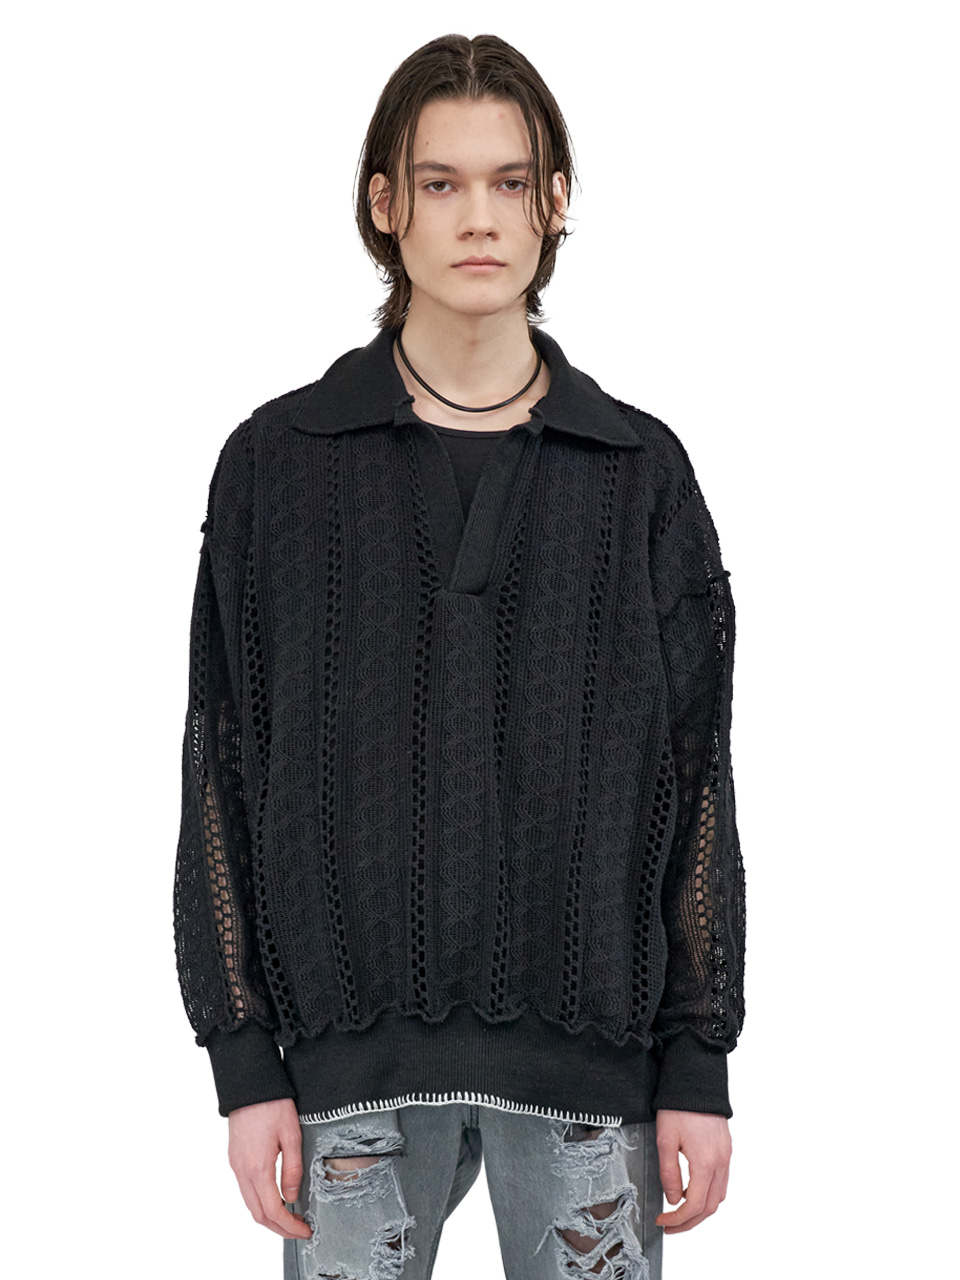 PUNCHING CABLE KNIT PK_[BLACK]